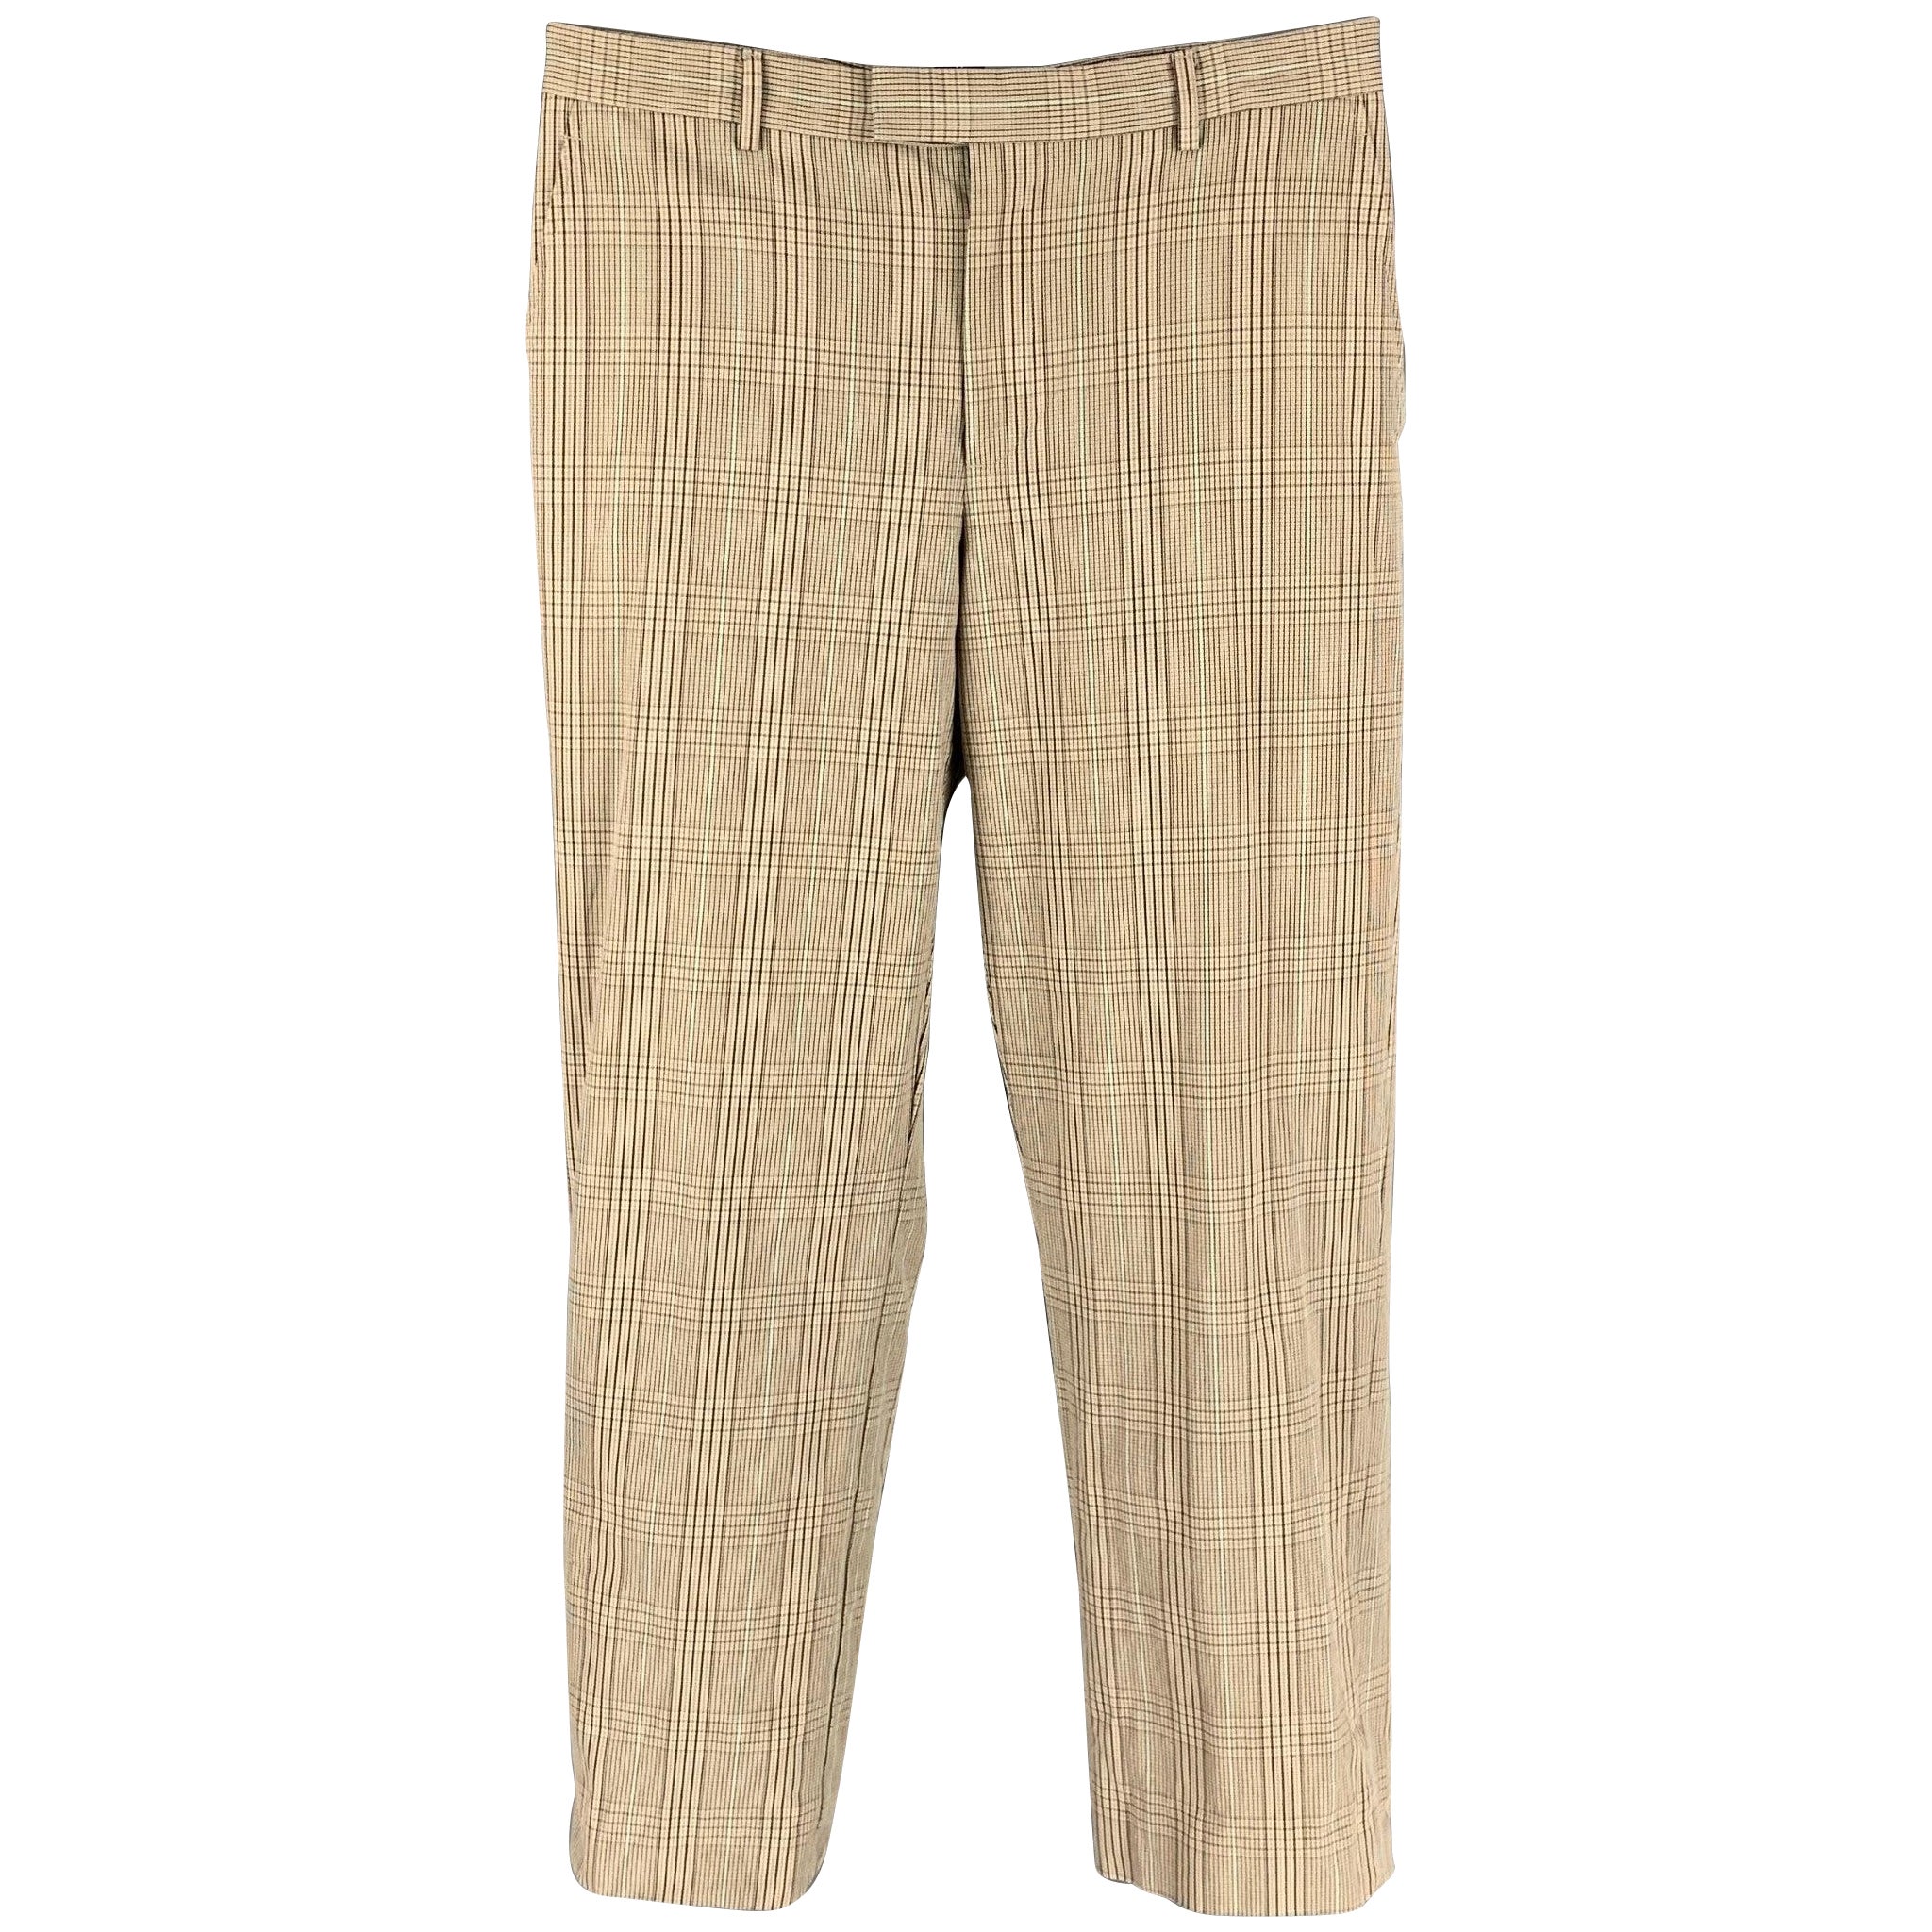 PAUL SMITH Size 36 Taupe & Brown Plaid Cotton Flat Front Dress Pants For Sale